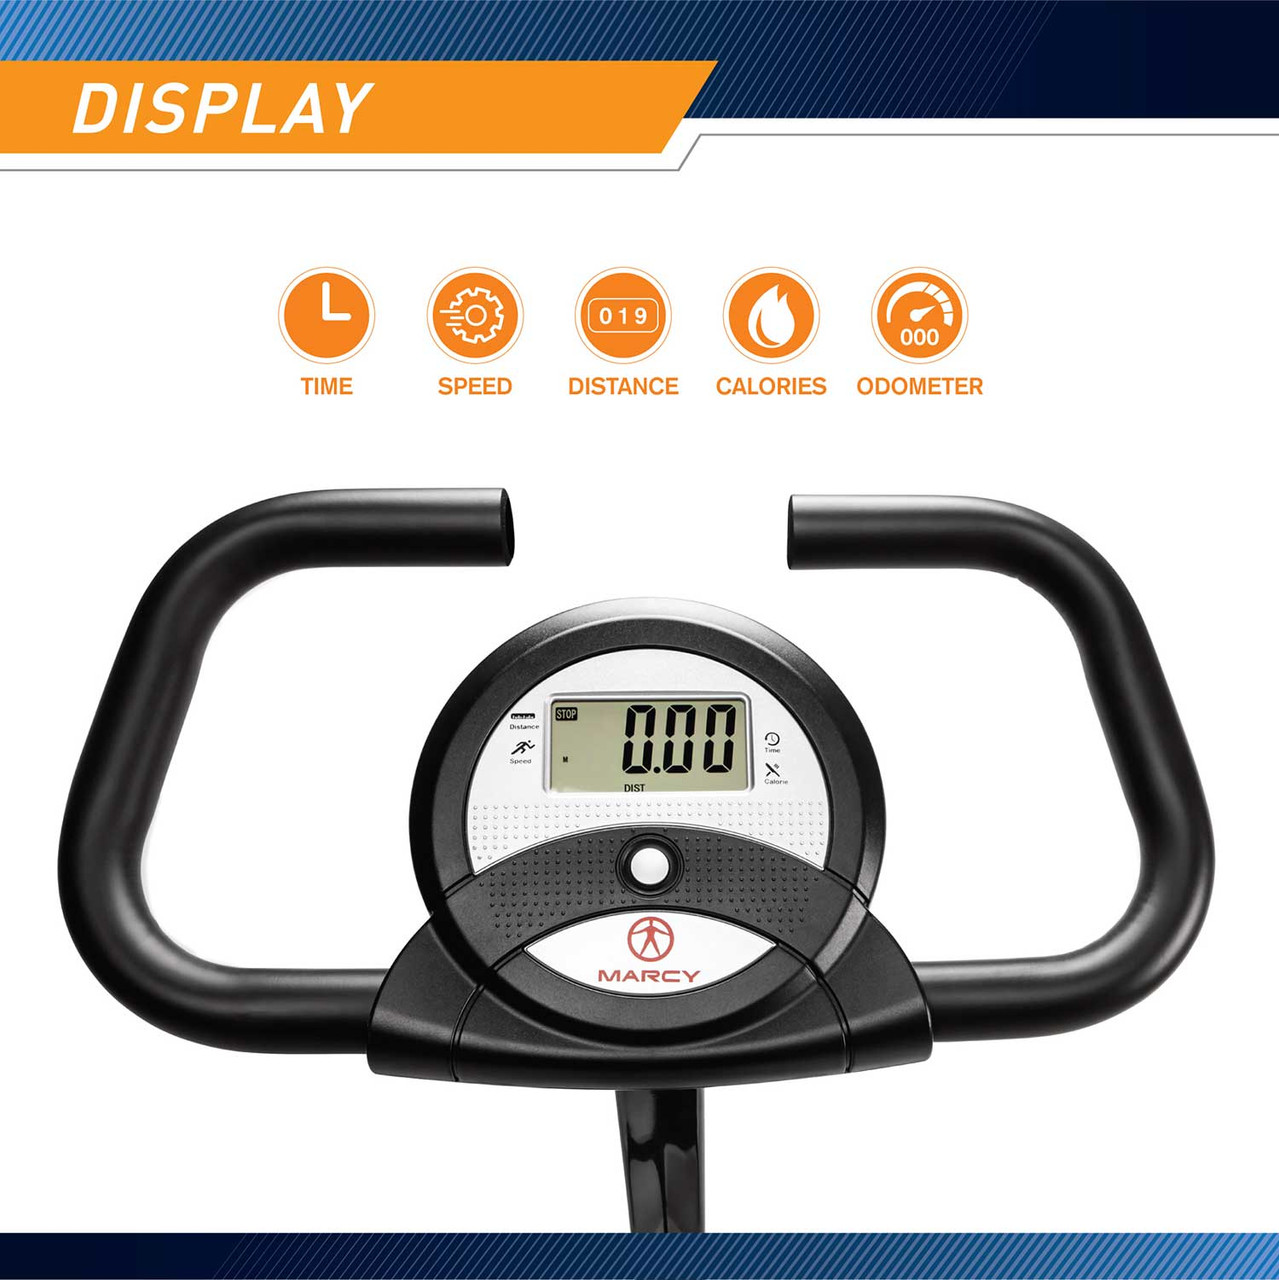 The Marcy Foldable Exercise Bike with High Back Seat NS-653 has a display screen to help track your progress